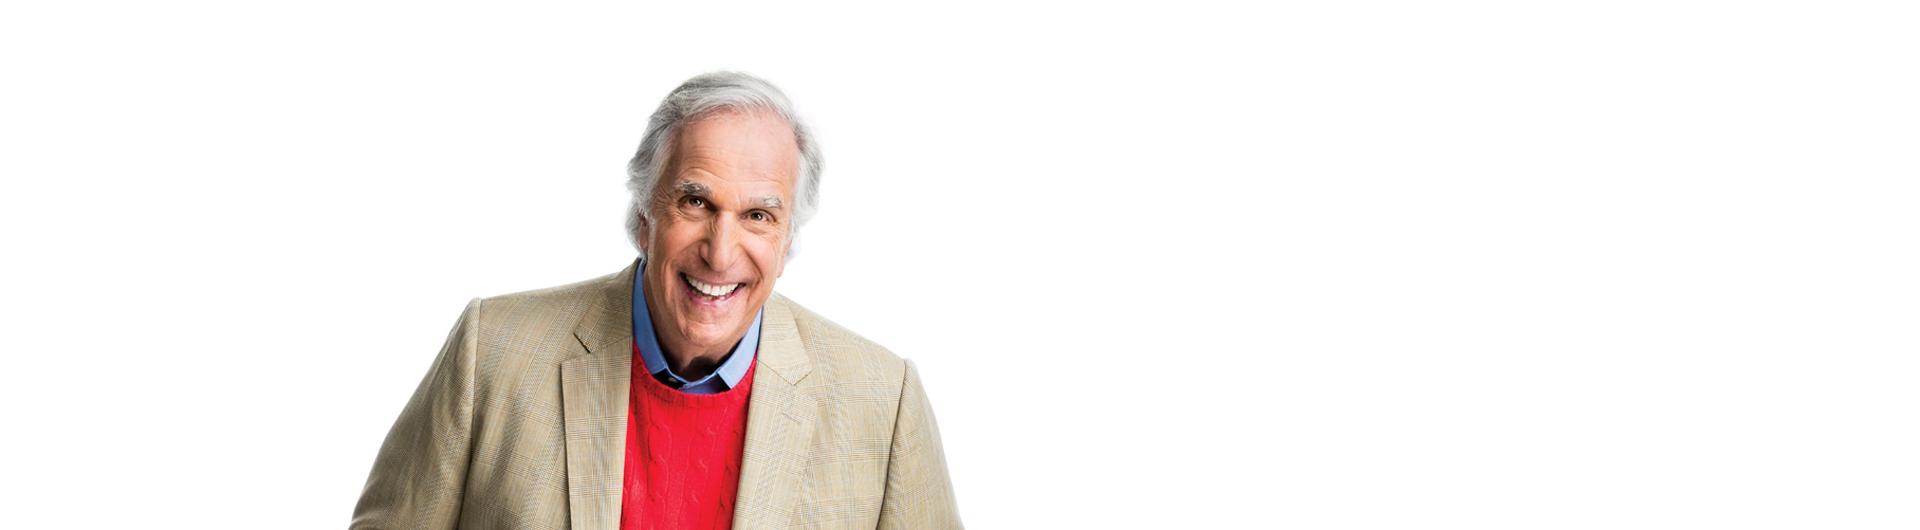 Henry Winkler in a red sweater and tan jacket smiling at the viewer.